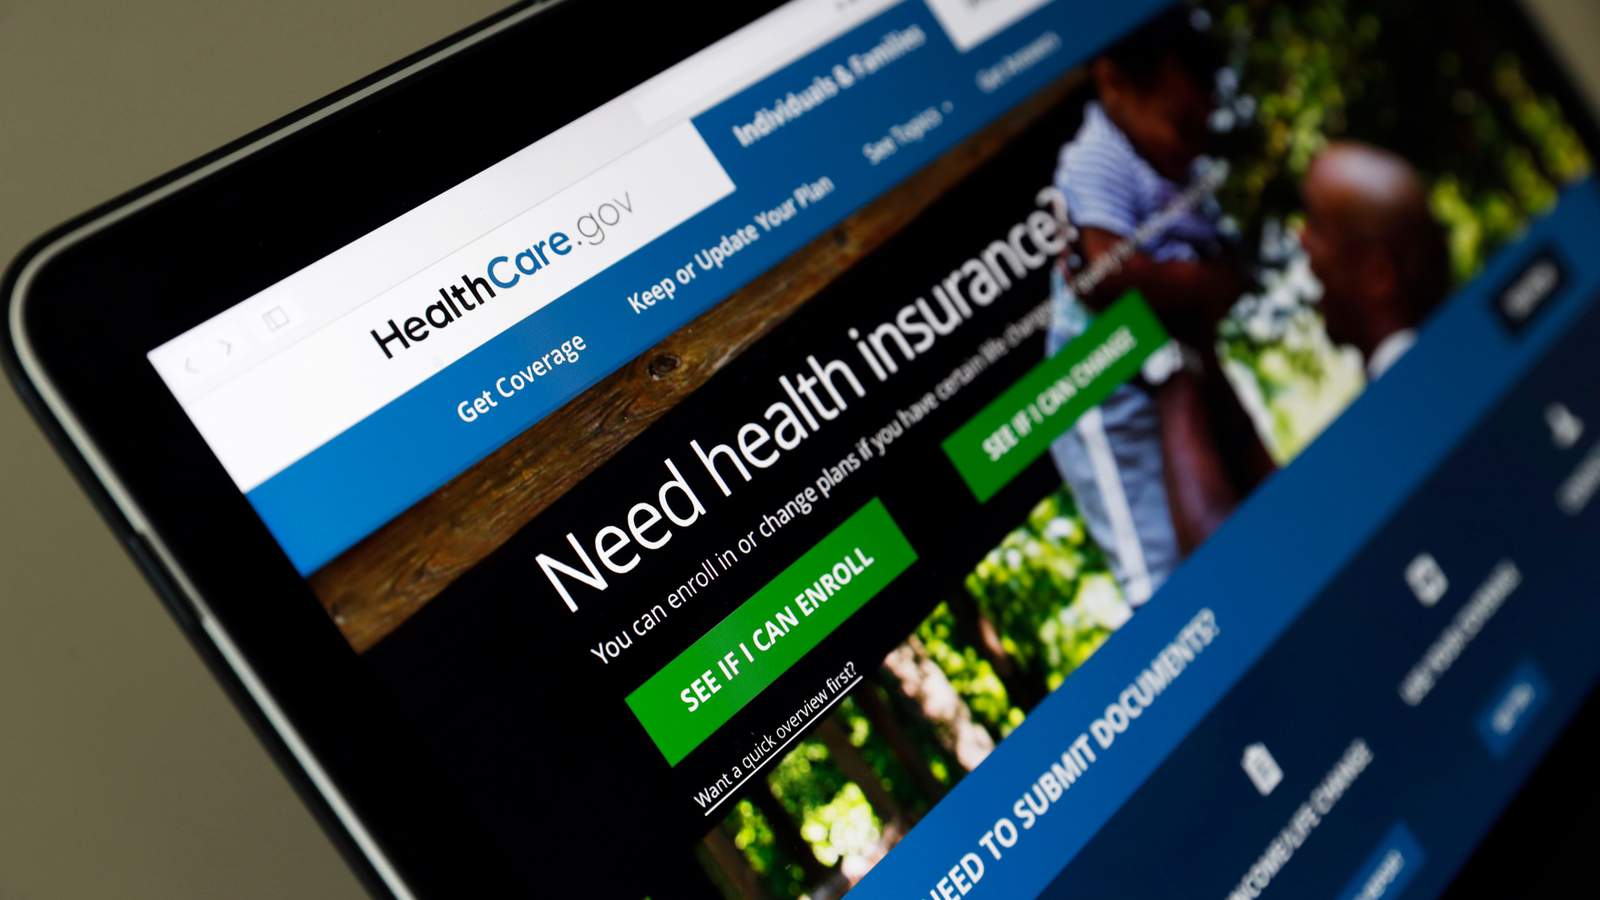 Today is the last day: 5 easy ways to navigate open enrollment